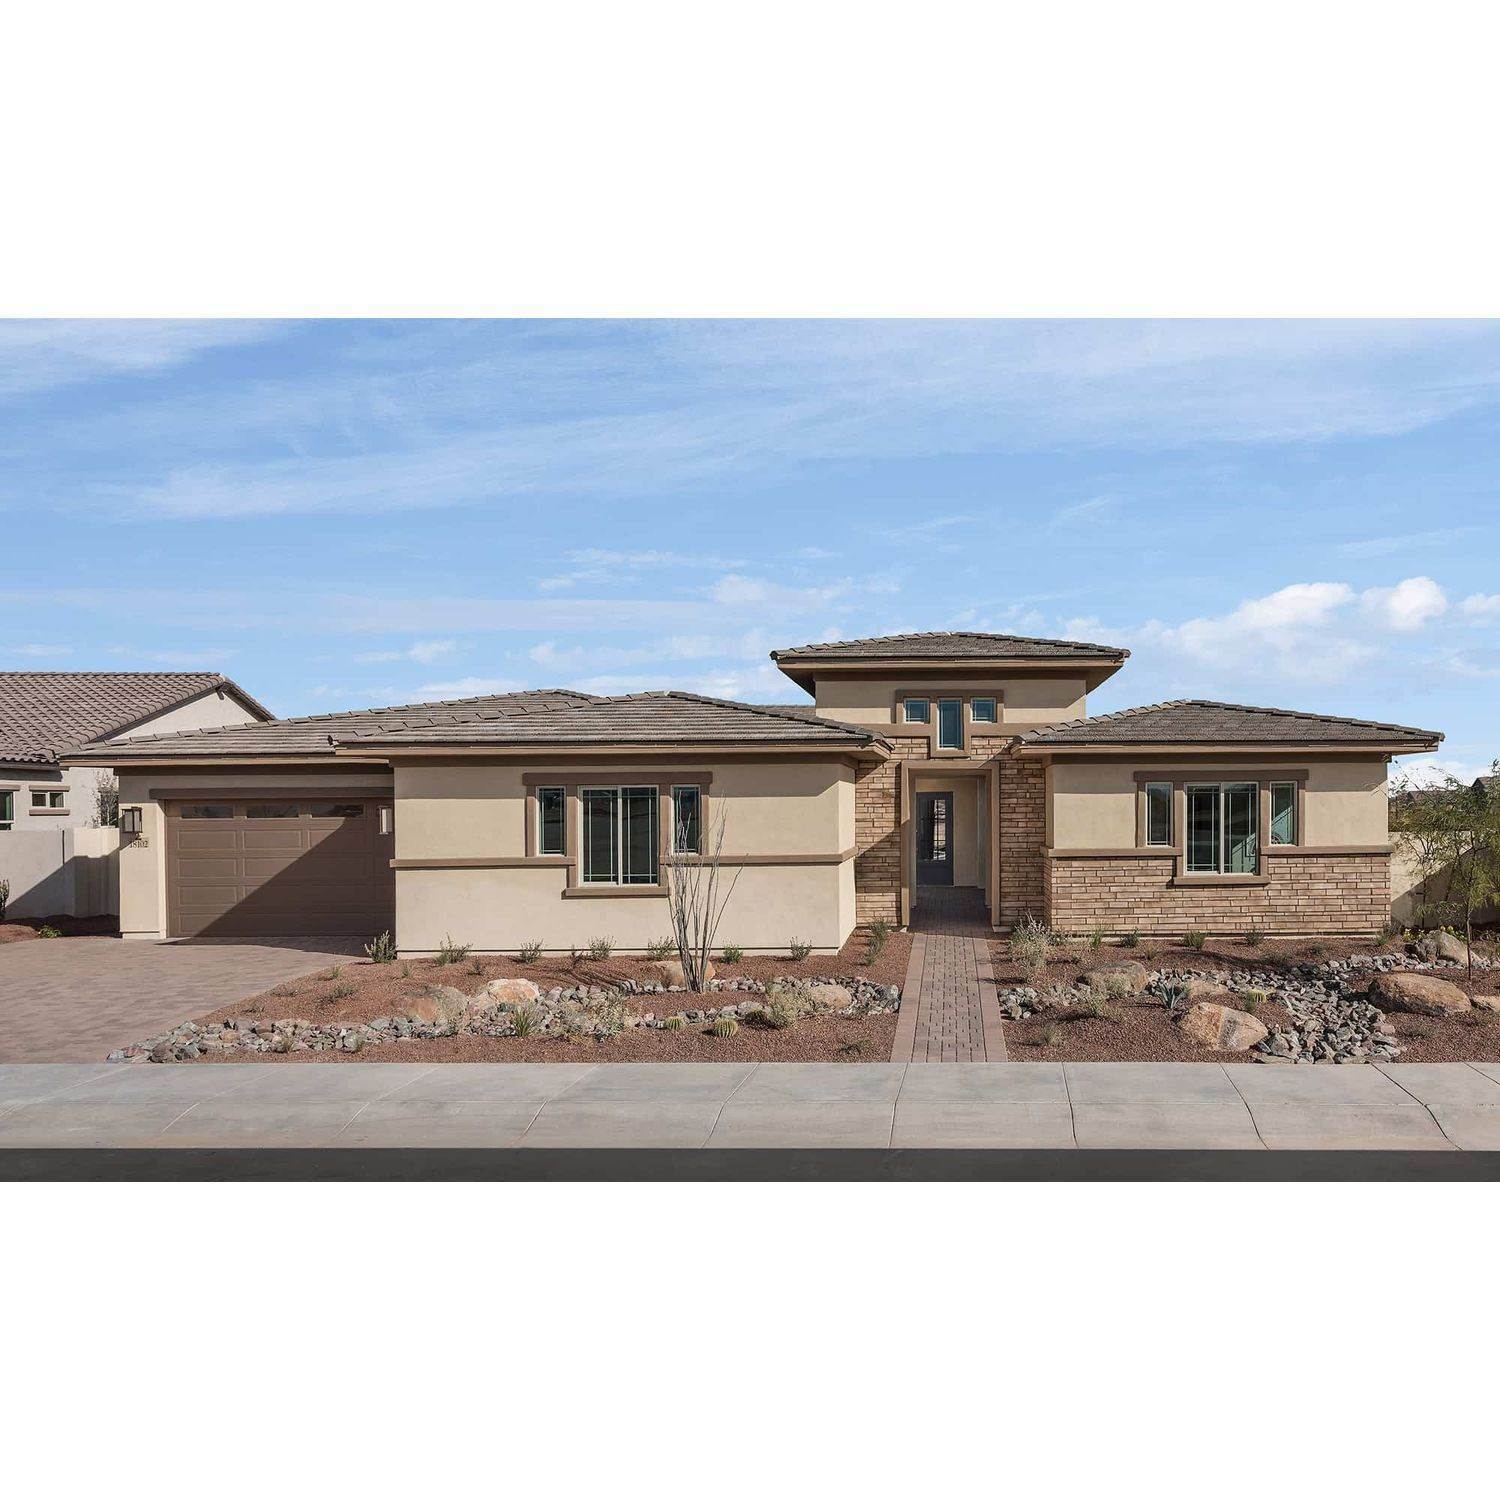 6. Single Family for Sale at Preserve At Sedella 18102 W Highland Ave., Goodyear, AZ 85395